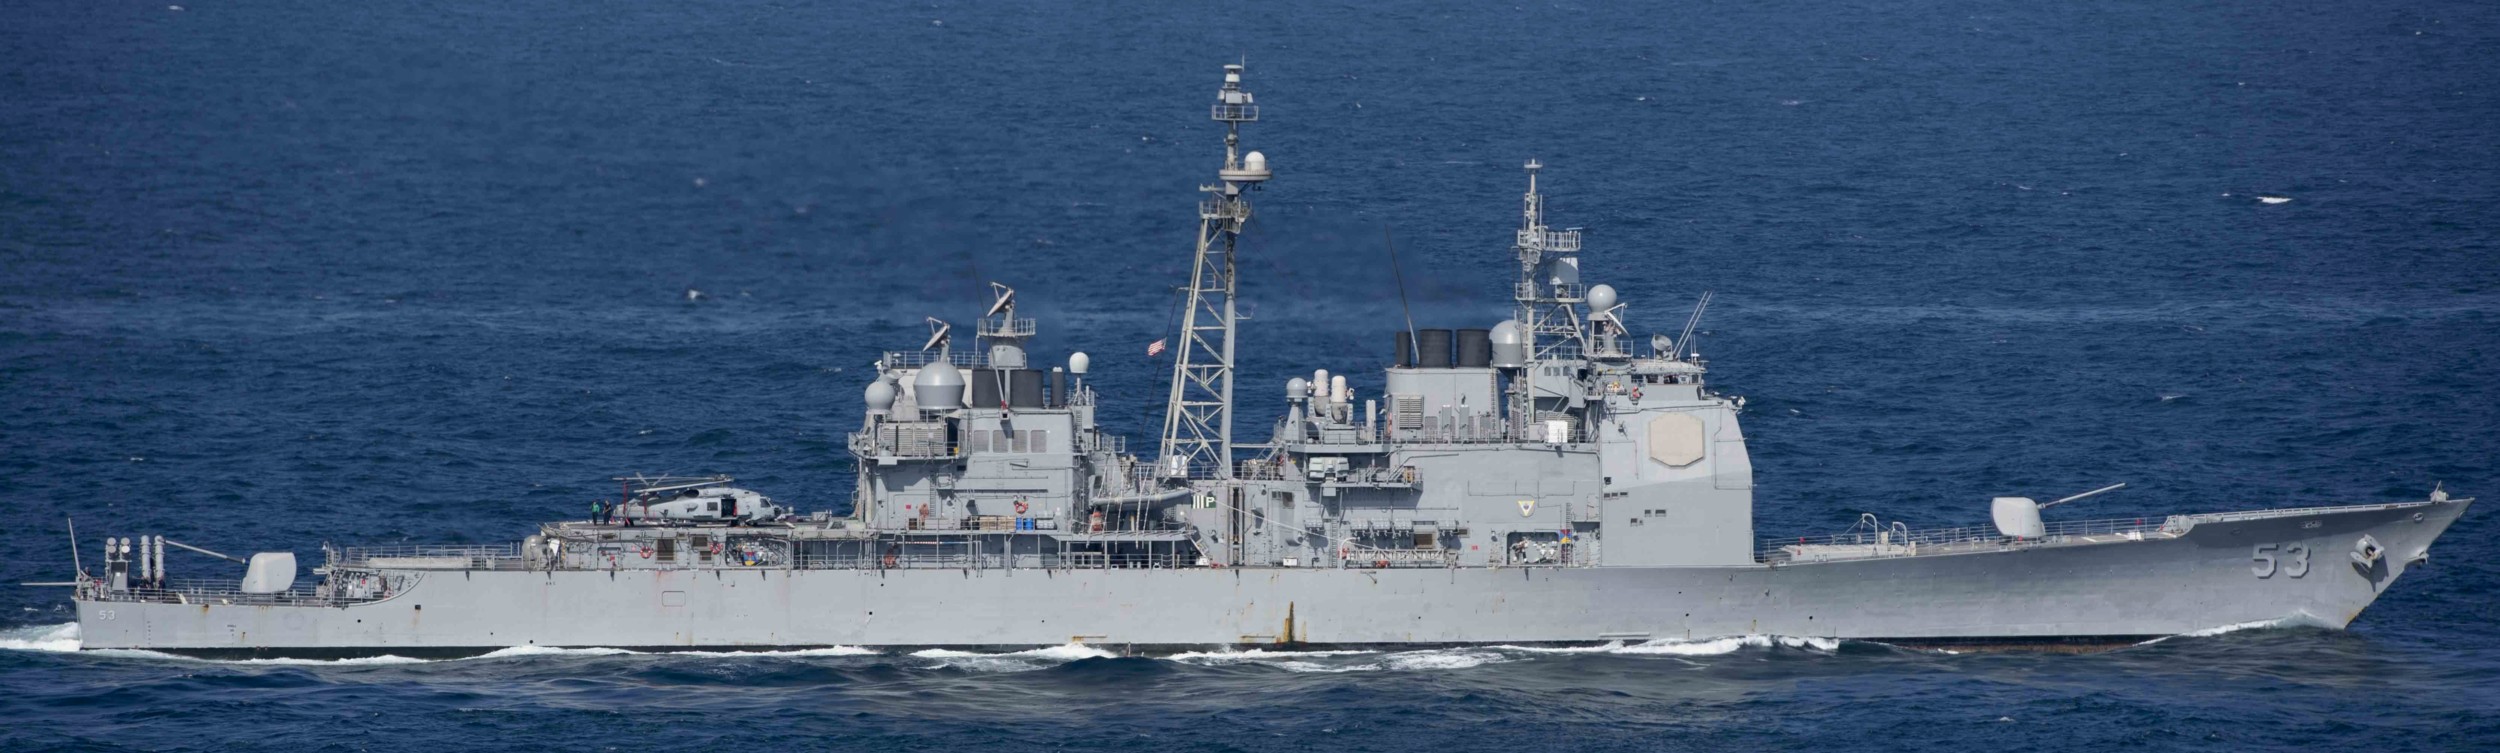 cg-53 uss mobile bay ticonderoga class guided missile cruiser aegis us navy 119